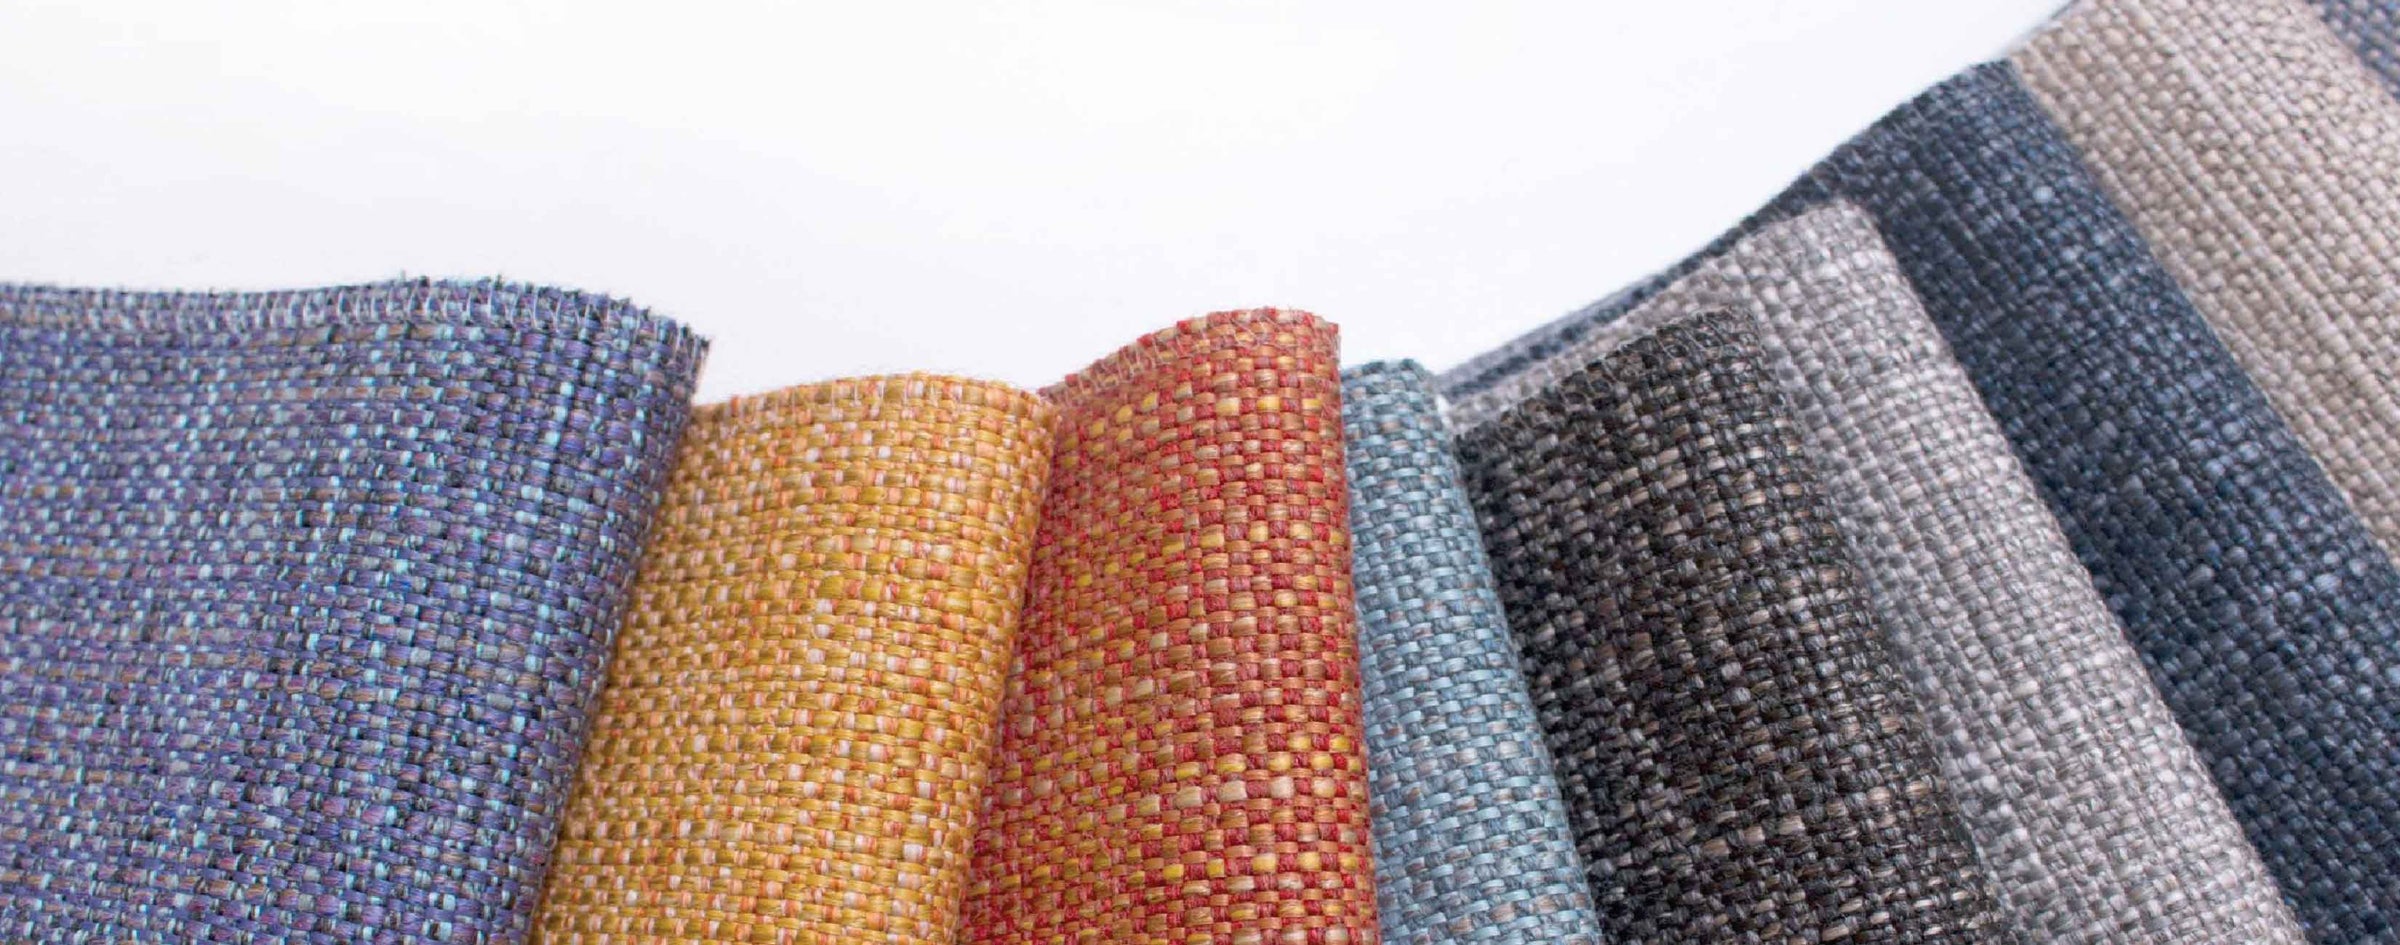 A close-view of supple and high quality recycled textile in a lovely array of colors.